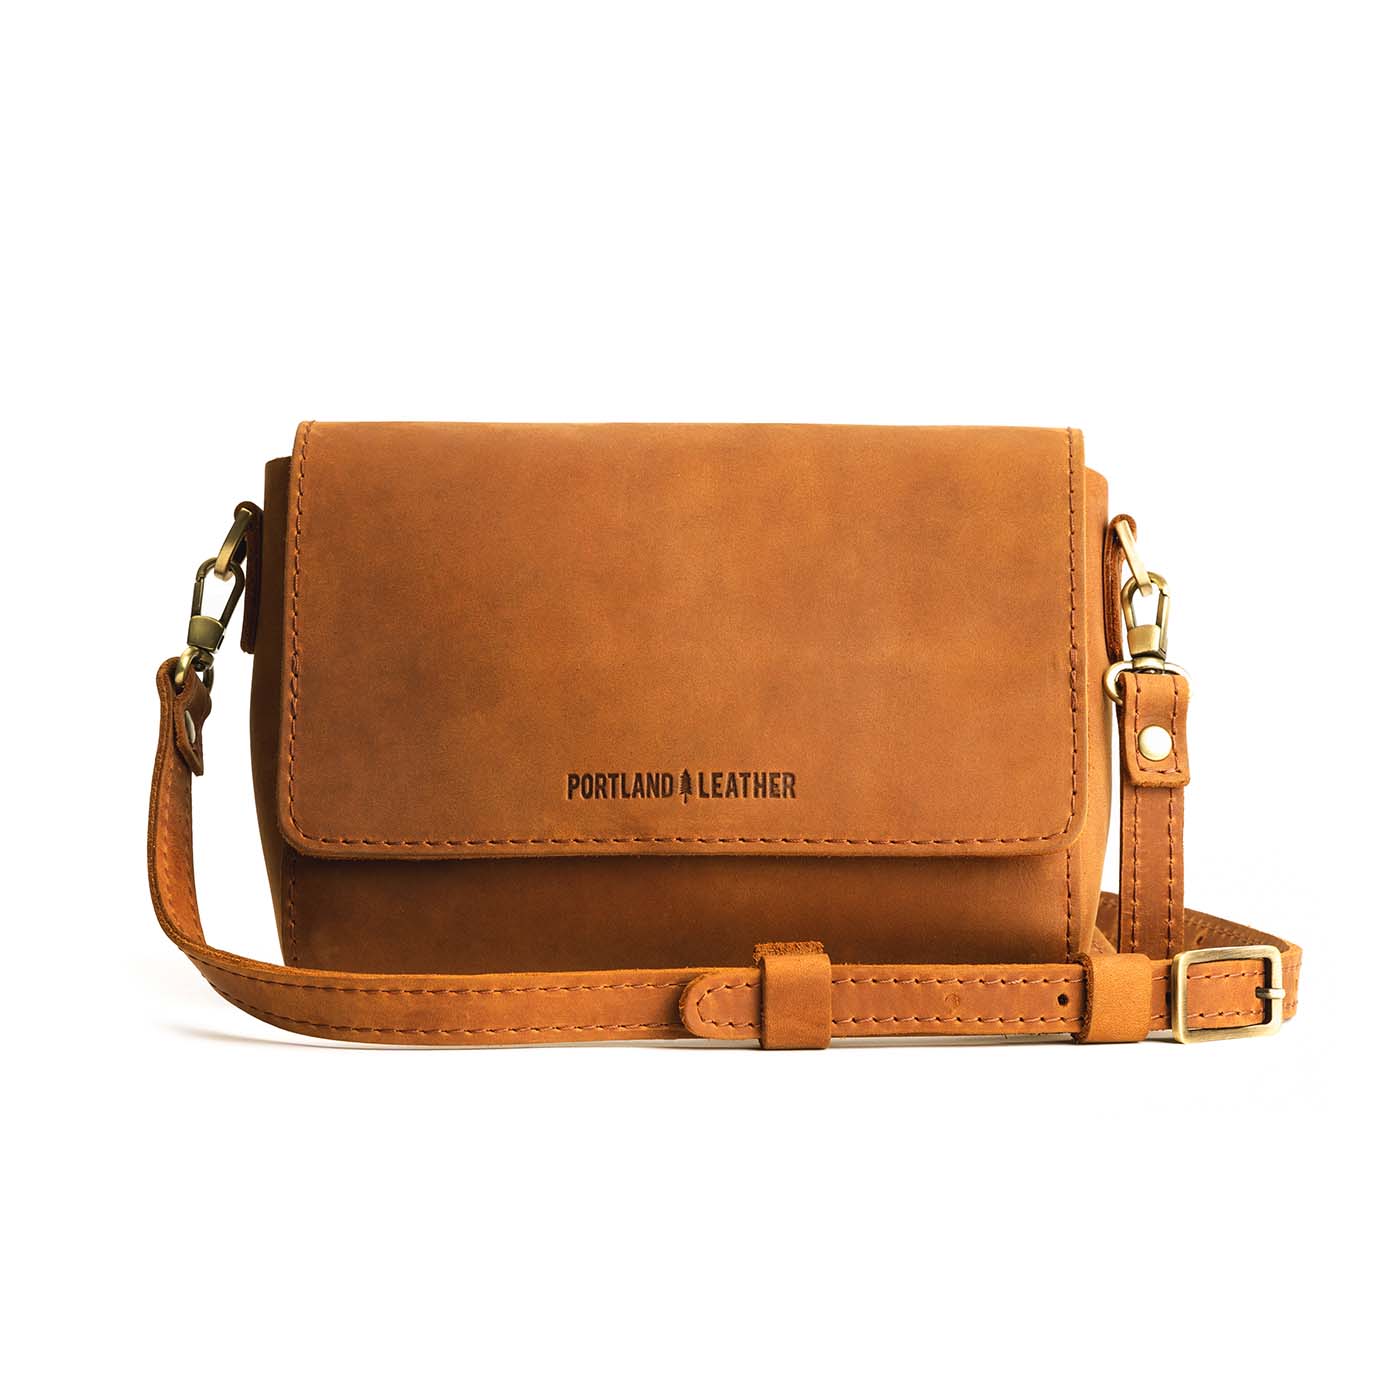 Portland Leather Goods Other Accessories for Women